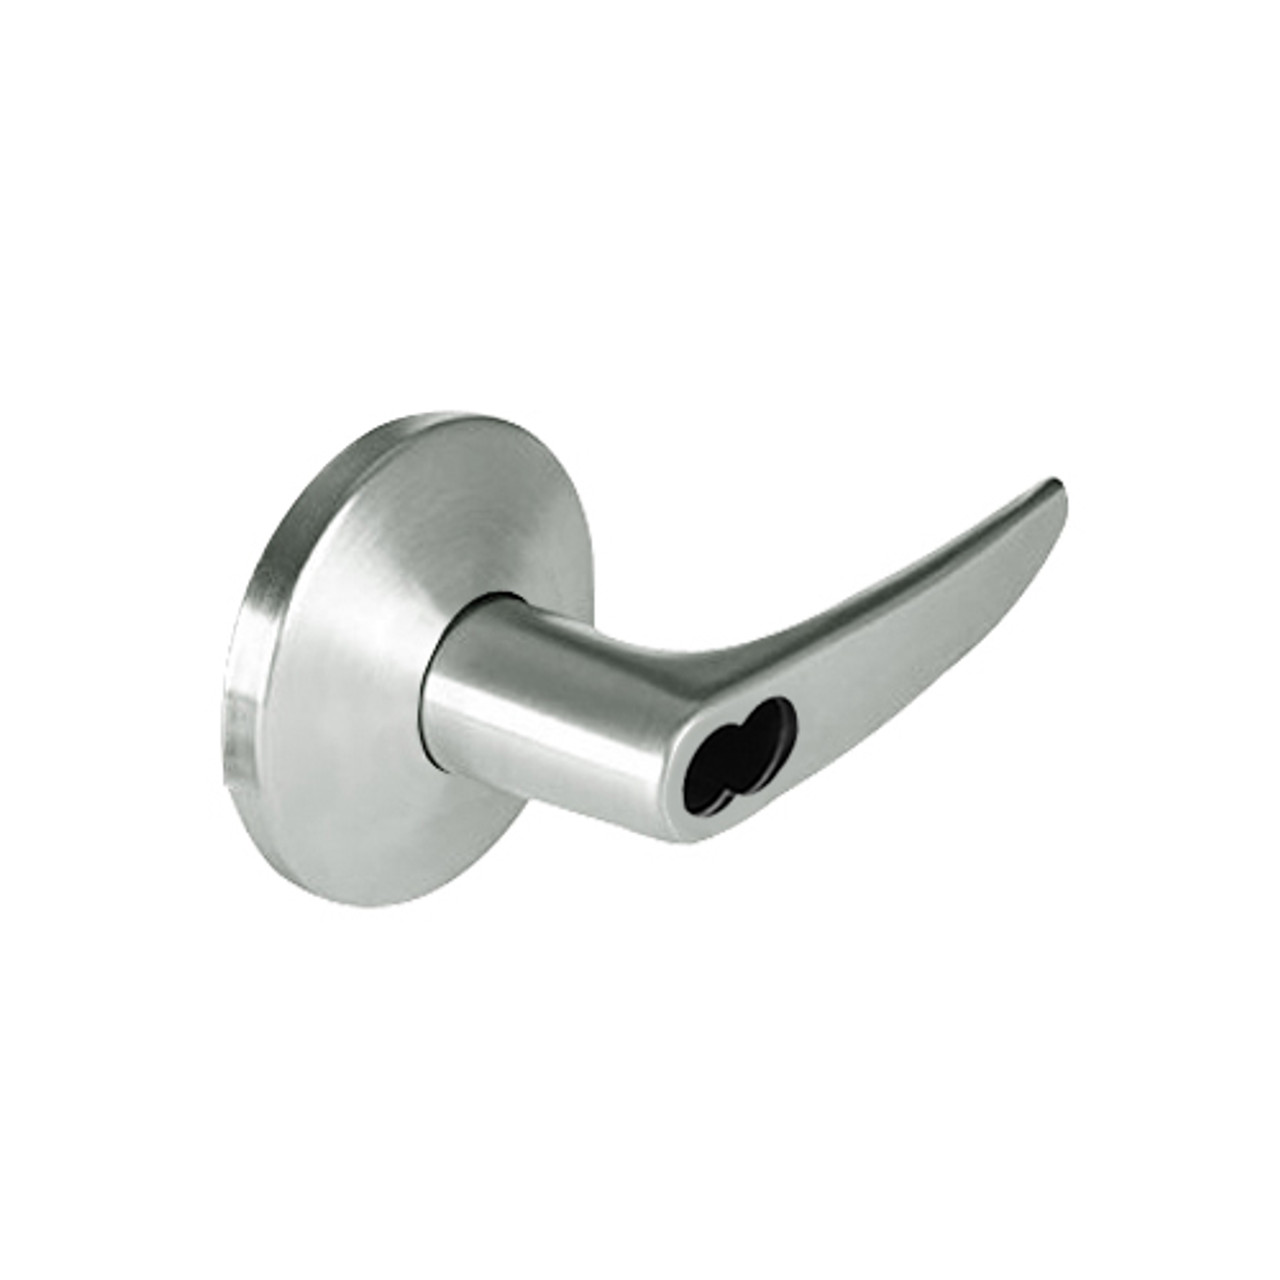 9K37HJ16LSTK618 Best 9K Series Hotel Cylindrical Lever Locks with Curved without Return Lever Design Accept 7 Pin Best Core in Bright Nickel